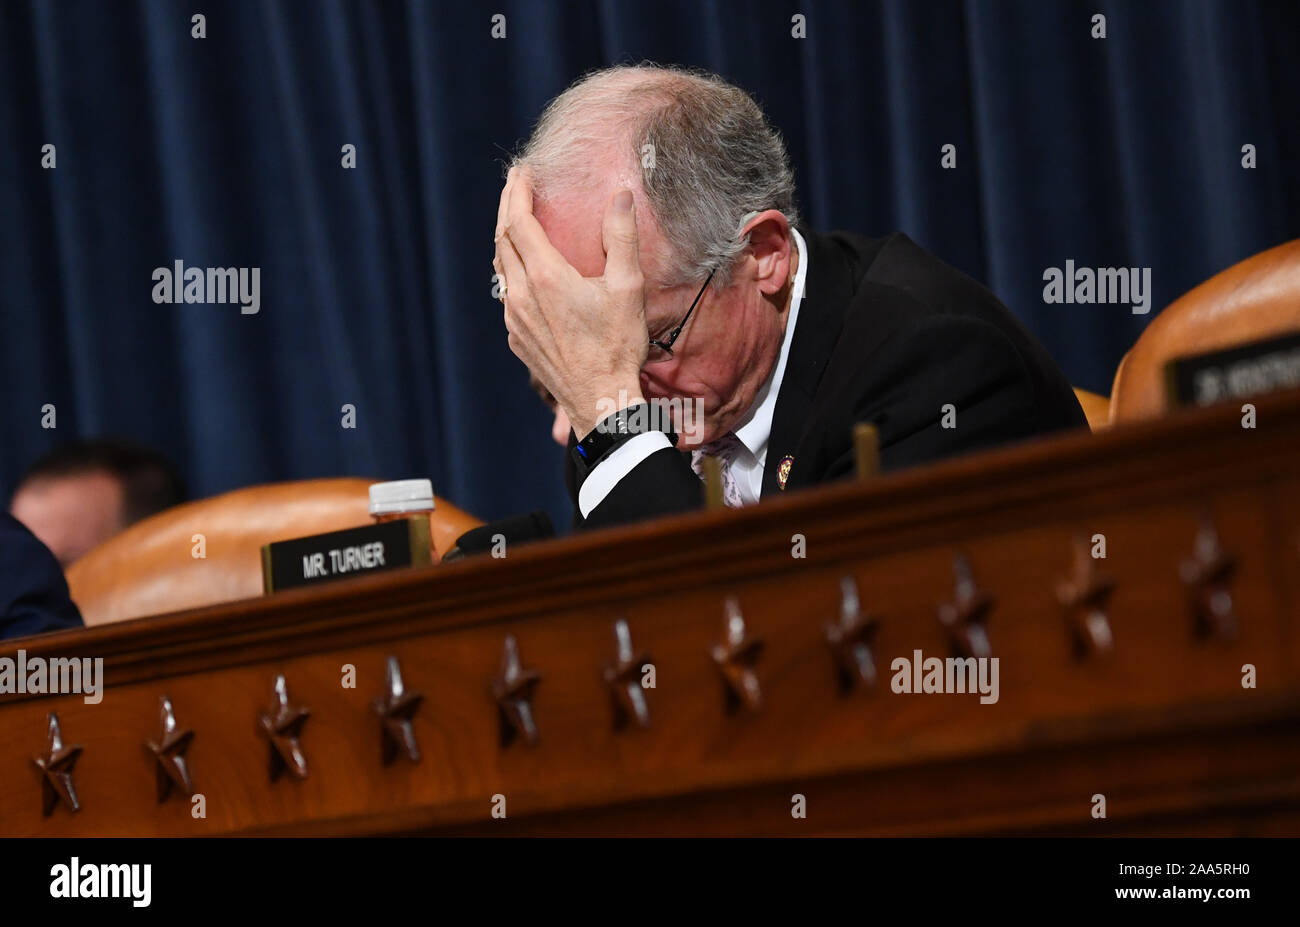 Washington, United States. 19th Nov, 2019. Rep. Mike Conaway, R-Tex., listens as former State Department special envoy to Ukraine Kurt Volker testifies before the House Permanent Select Committee on Intelligence as part of the impeachment inquiry into President Donald Trump, on Capitol Hill in Washington, DC, on Tuesday, November 19, 2019. The hearings are looking into whether Trump used military aid as leverage to pressure Ukraine into investigations that would benefit him politically. Photo by Kevin Dietsch/UPI Credit: UPI/Alamy Live News Stock Photo